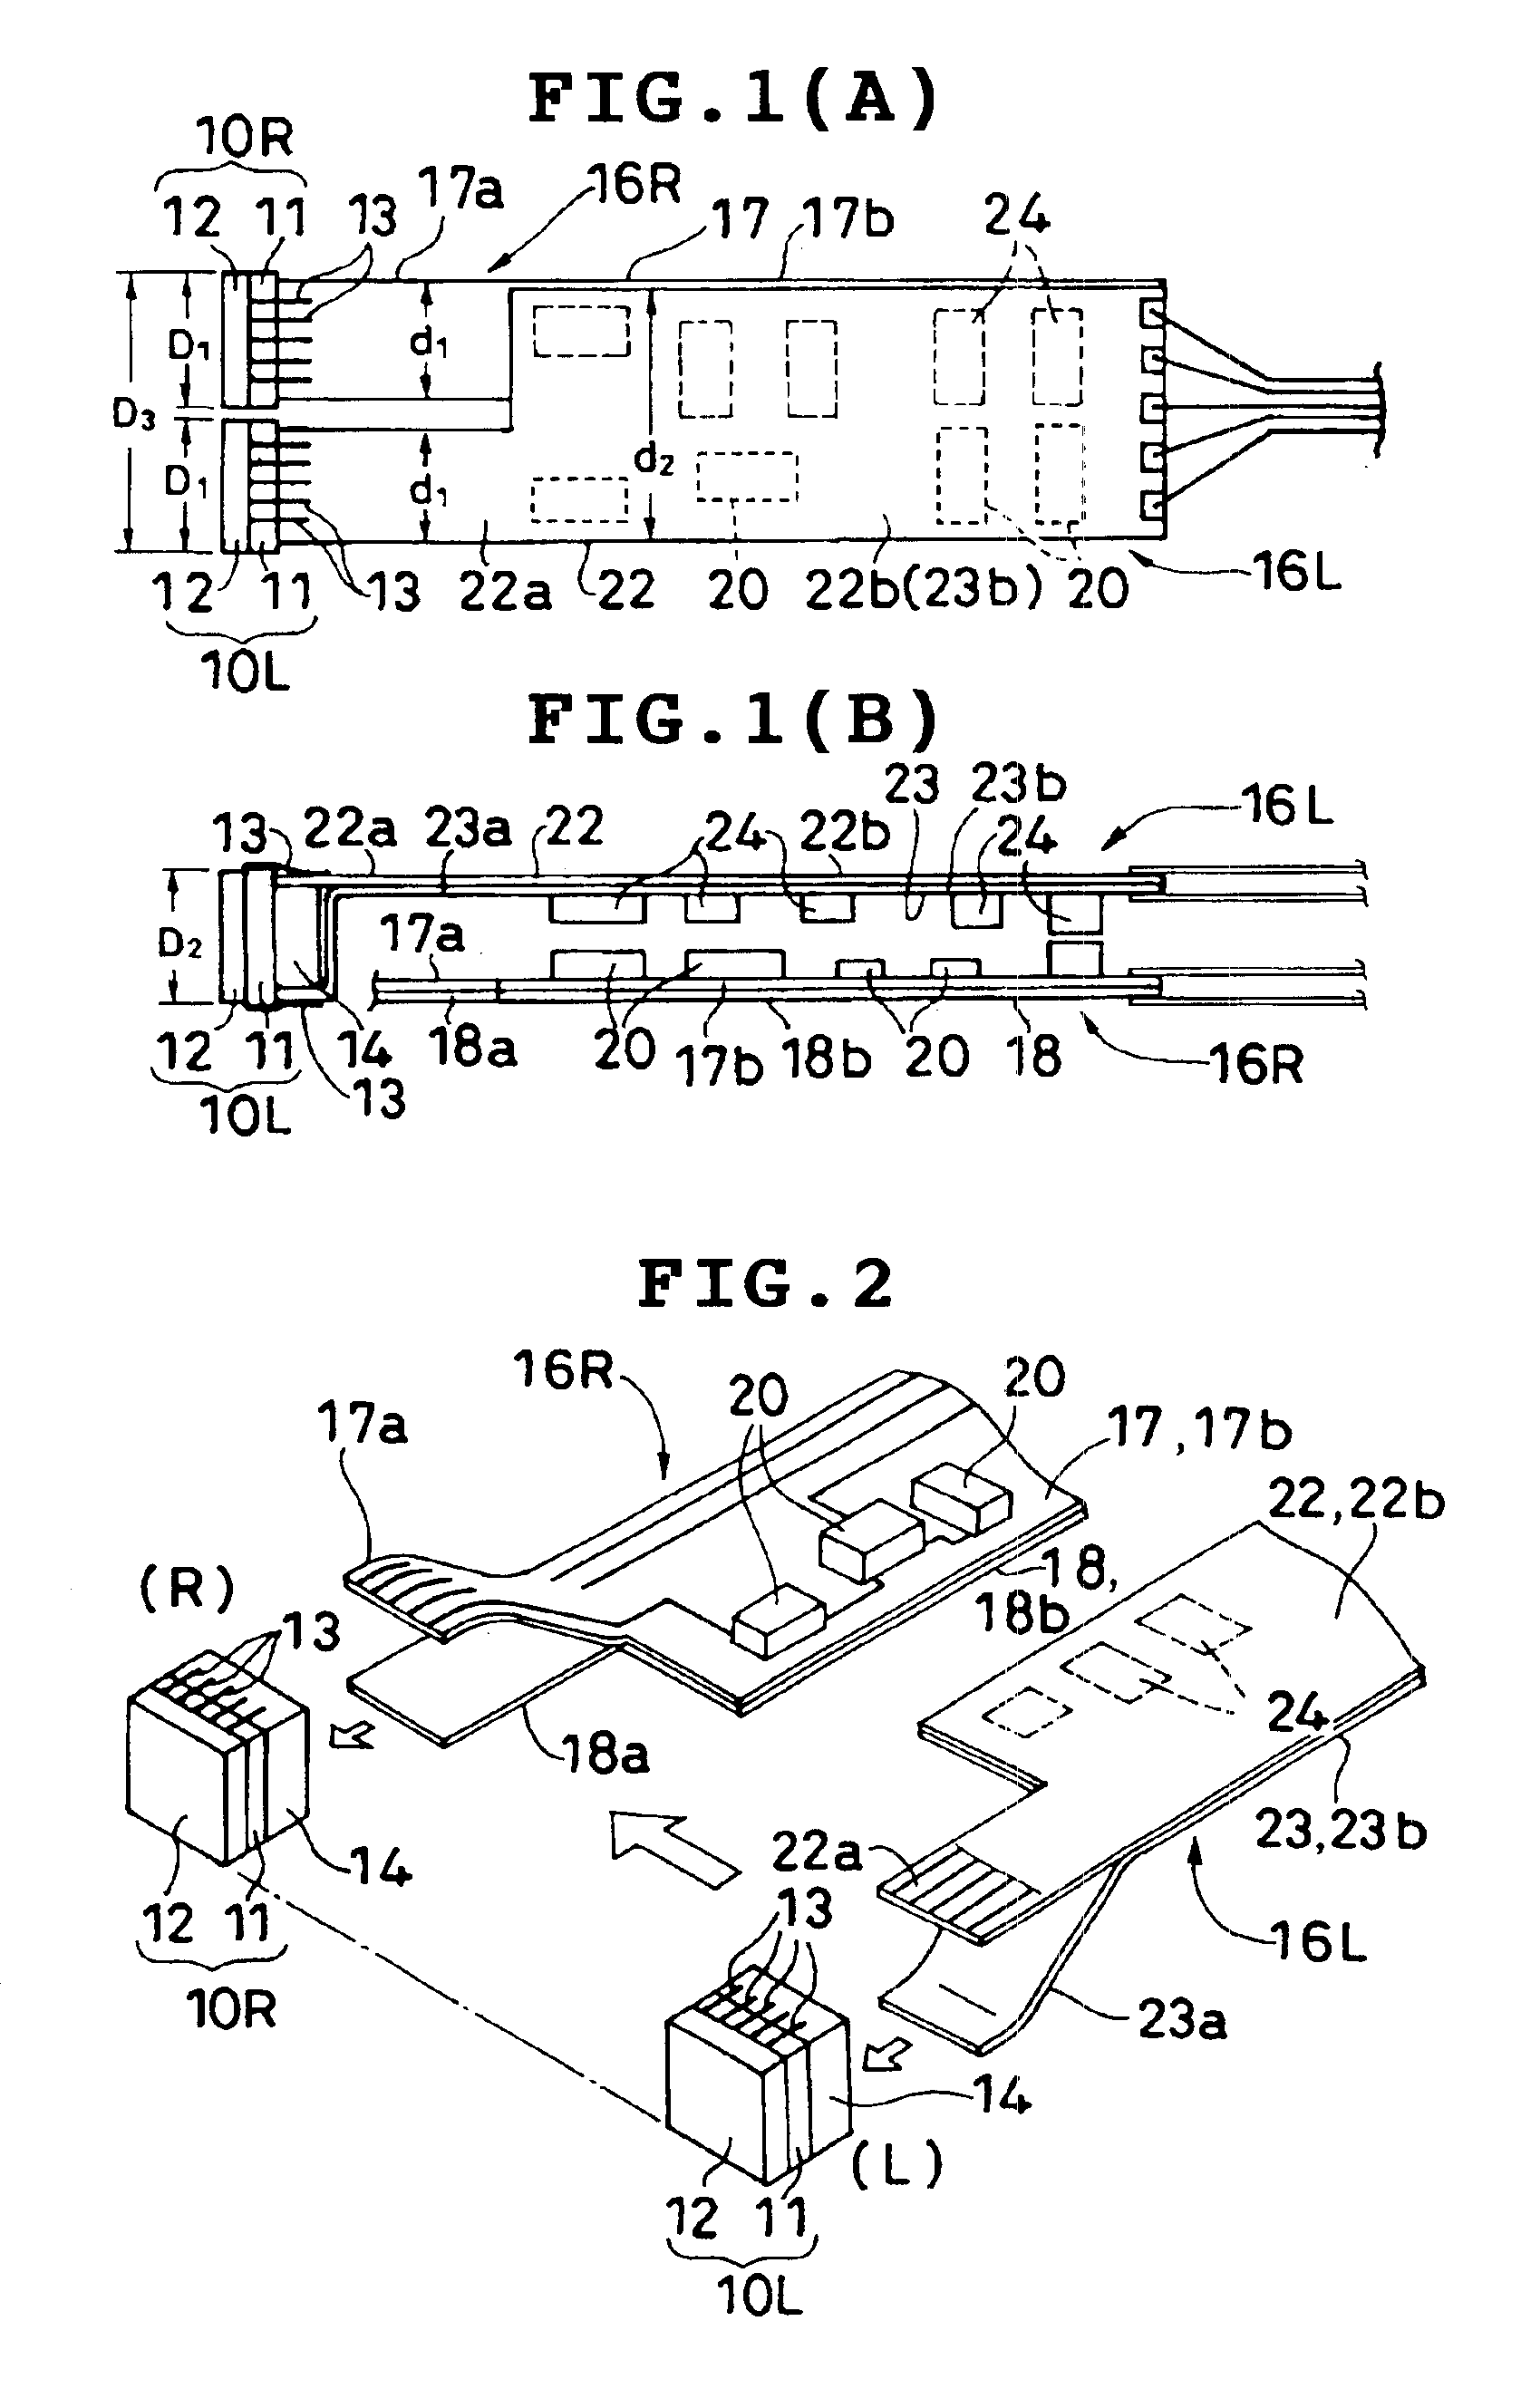 Imaging device assembly for electronic stereoscopic endoscope system